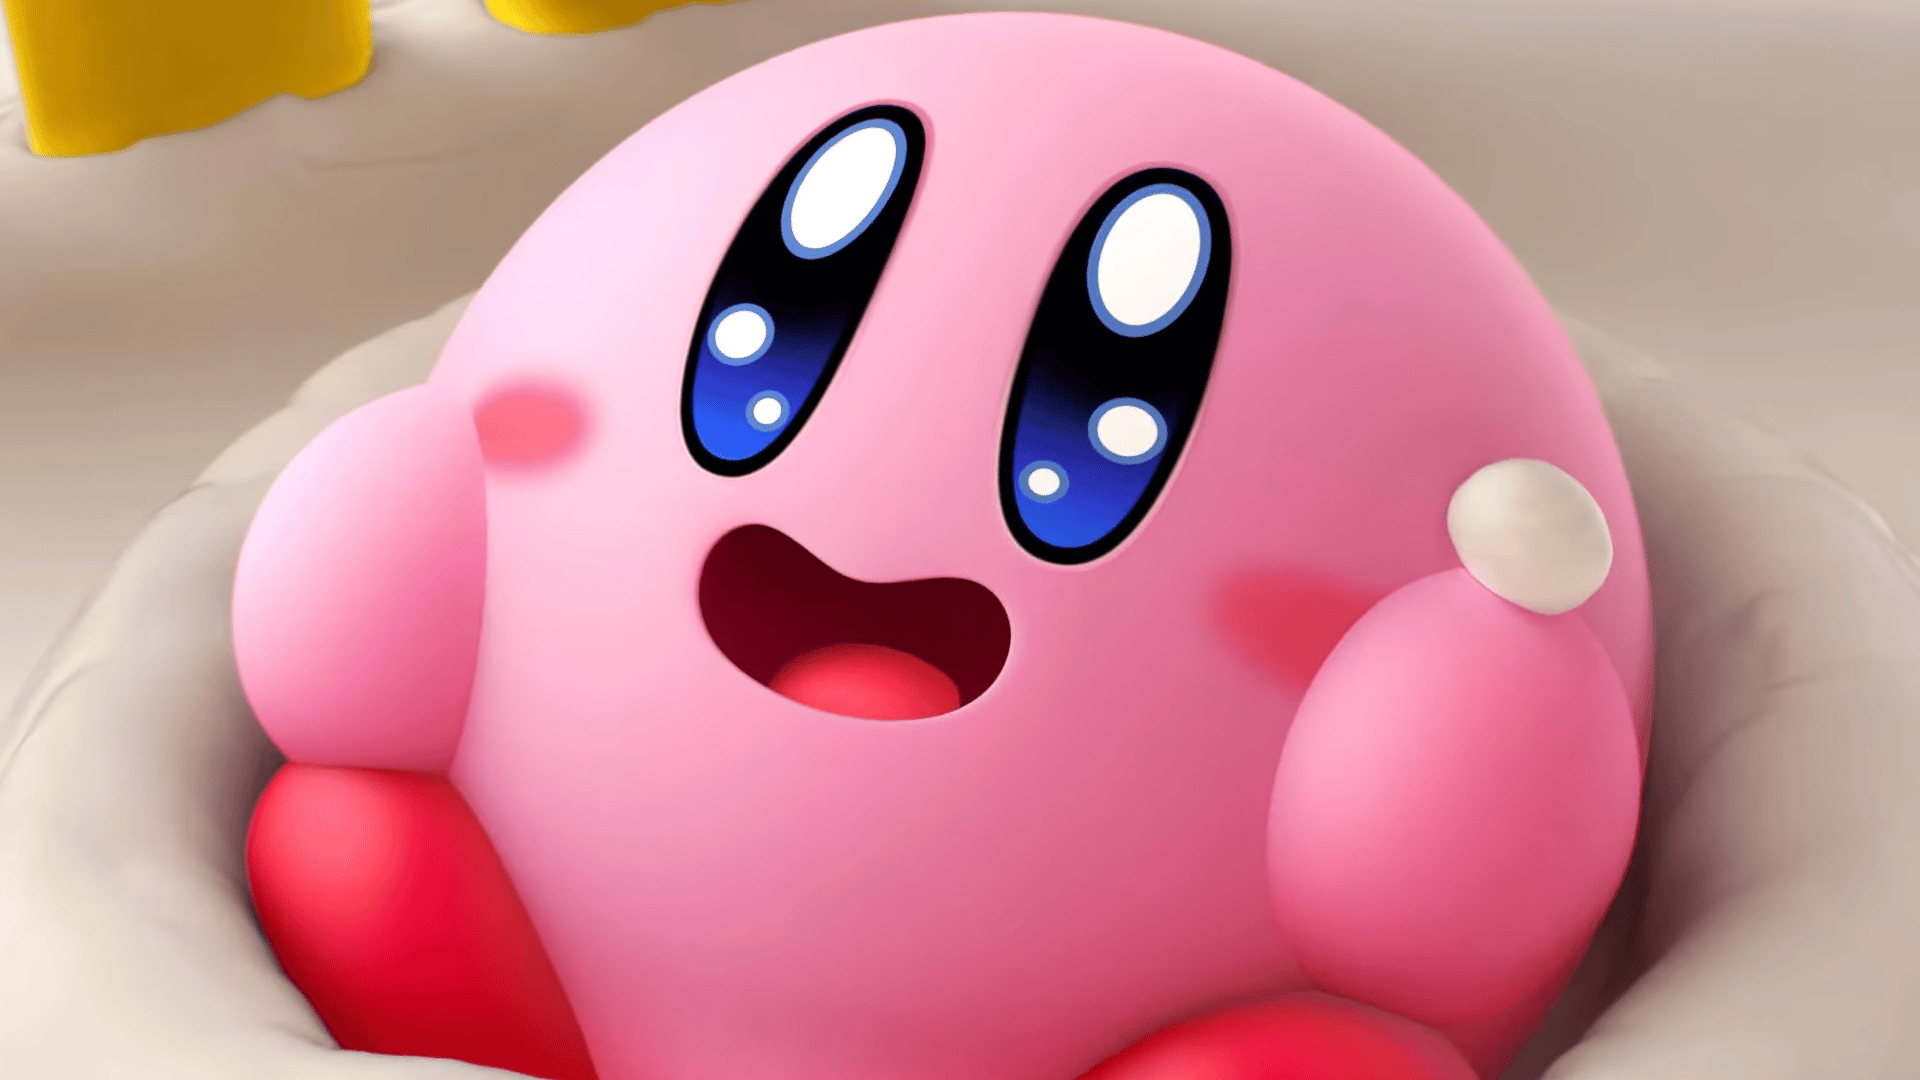 Kirby’s Dream Buffet Announced For Nintendo Switch; Digital-Only Summer 2022 Release, 4-Player Party Game